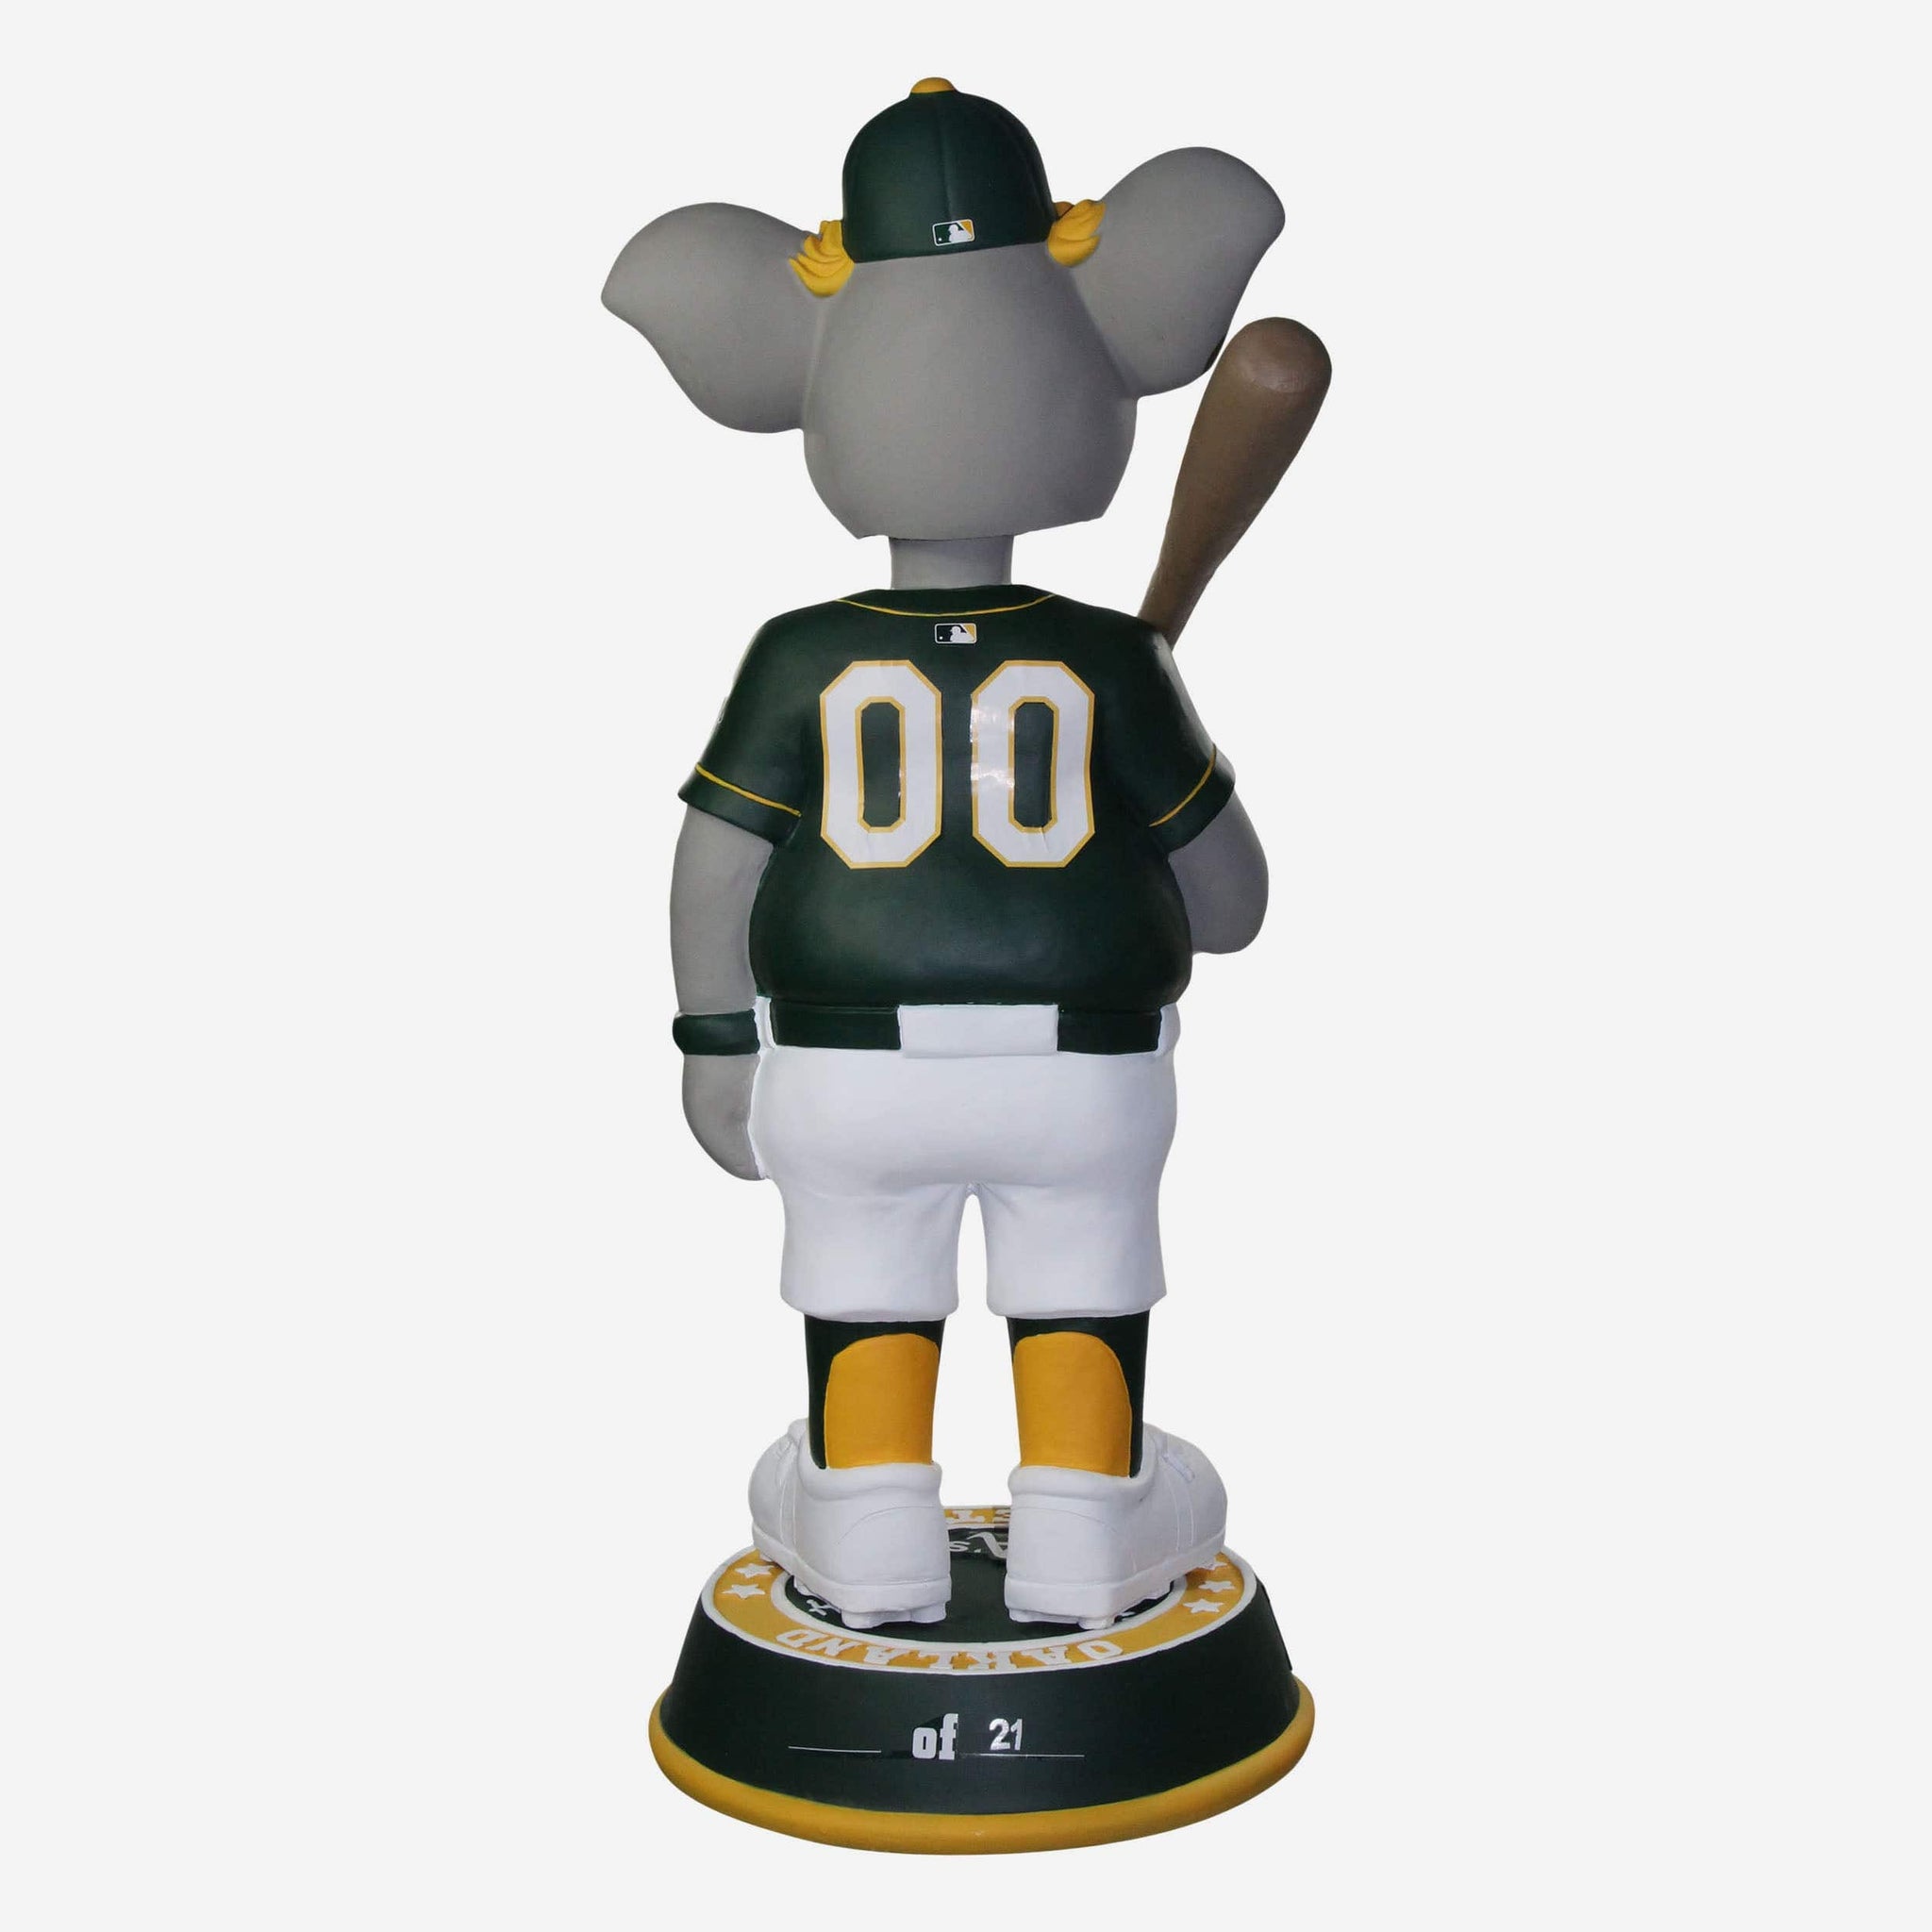 Stomper Oakland Athletics Mascot 3 ft Bobblehead Officially Licensed by MLB